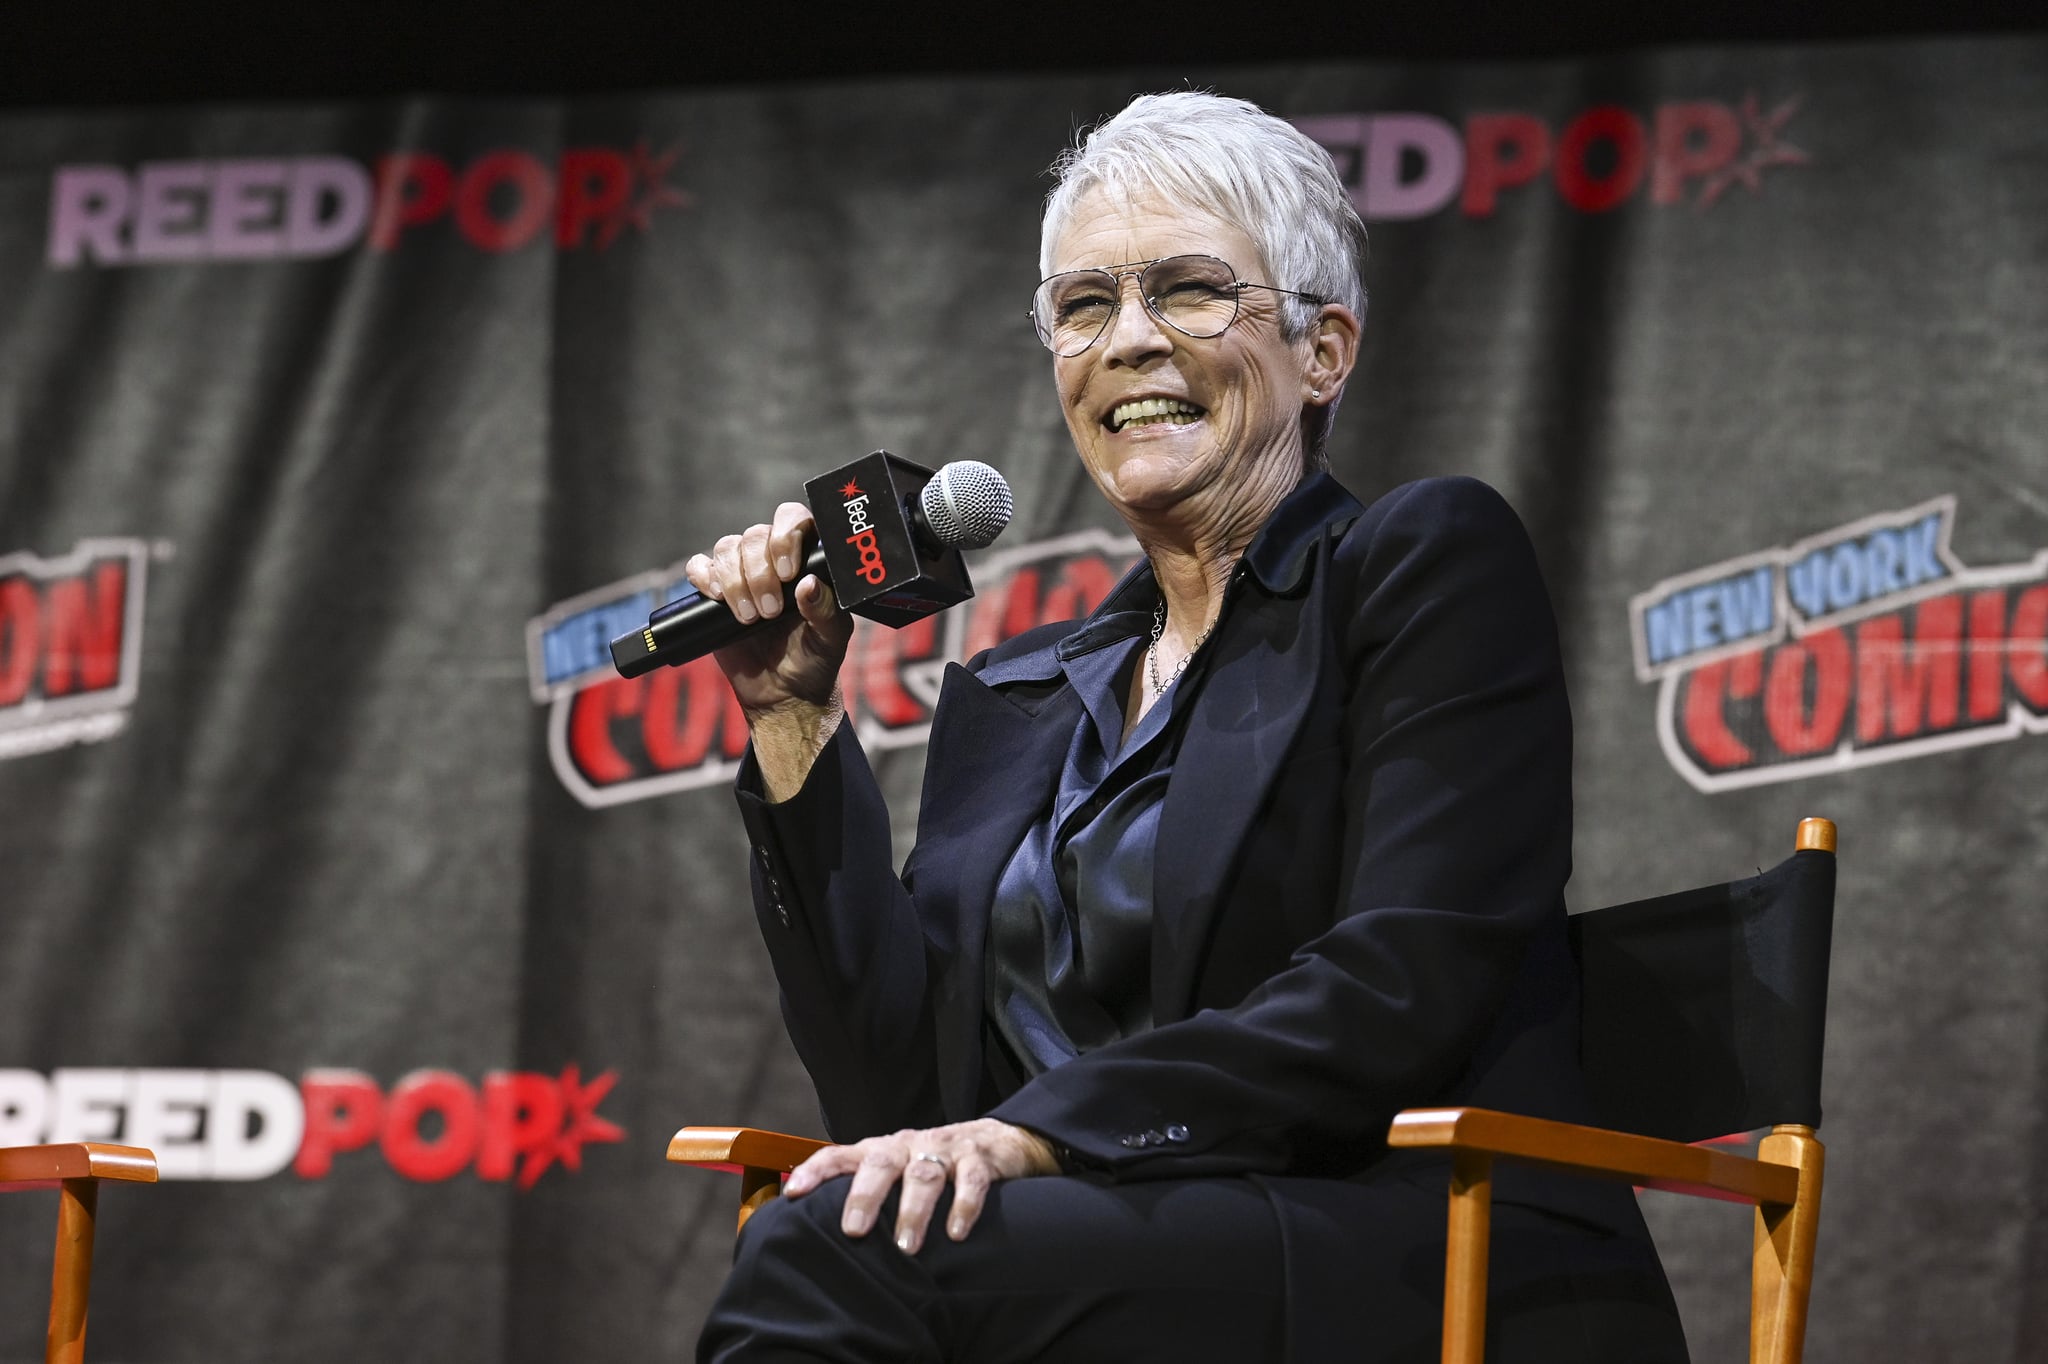 Jamie Lee Curtis Says She Owes Her Whole Life to the "Halloween" Films